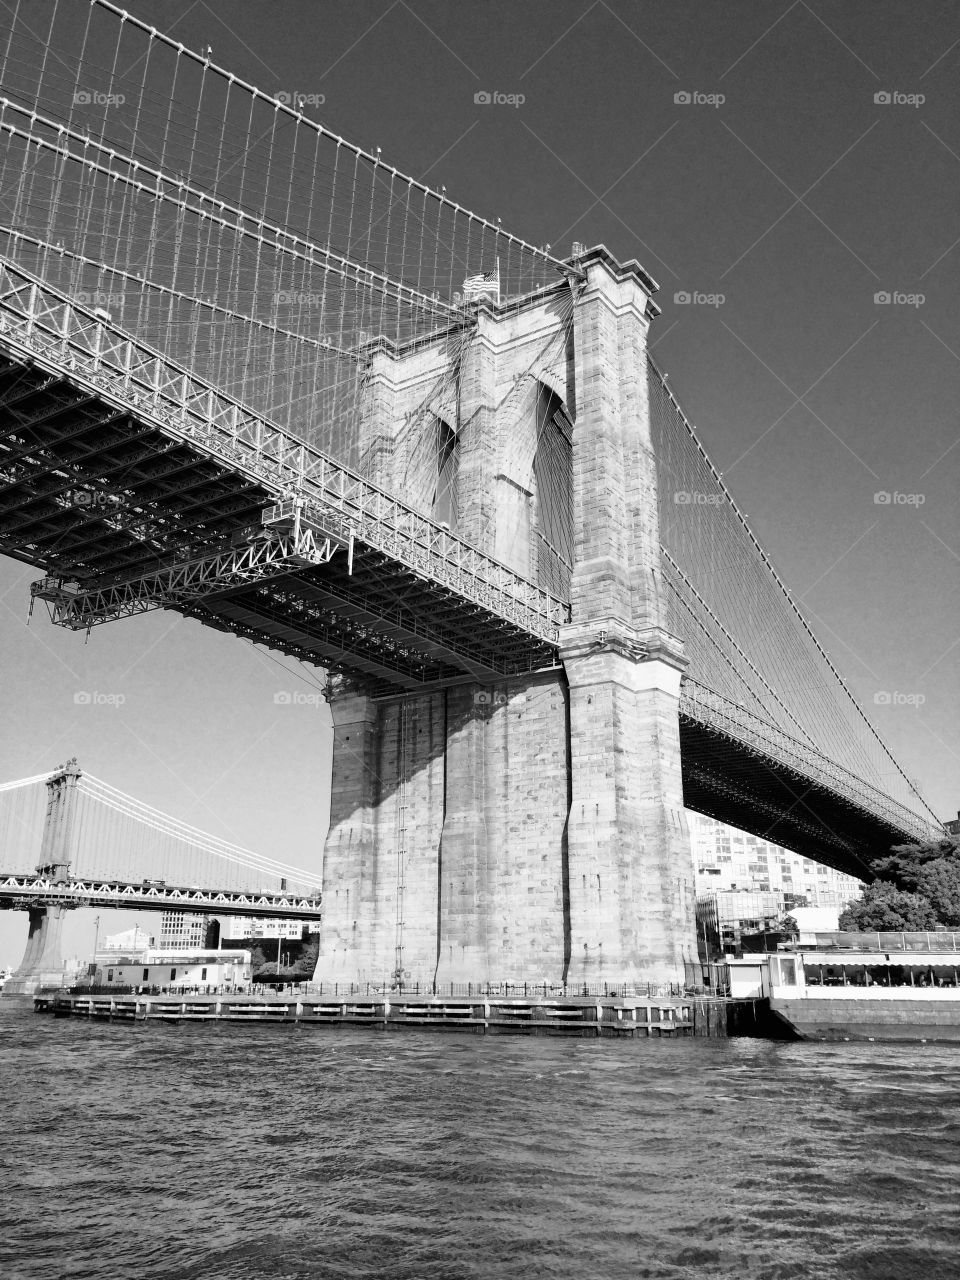 The Brooklyn Bridge in New York City in black and white